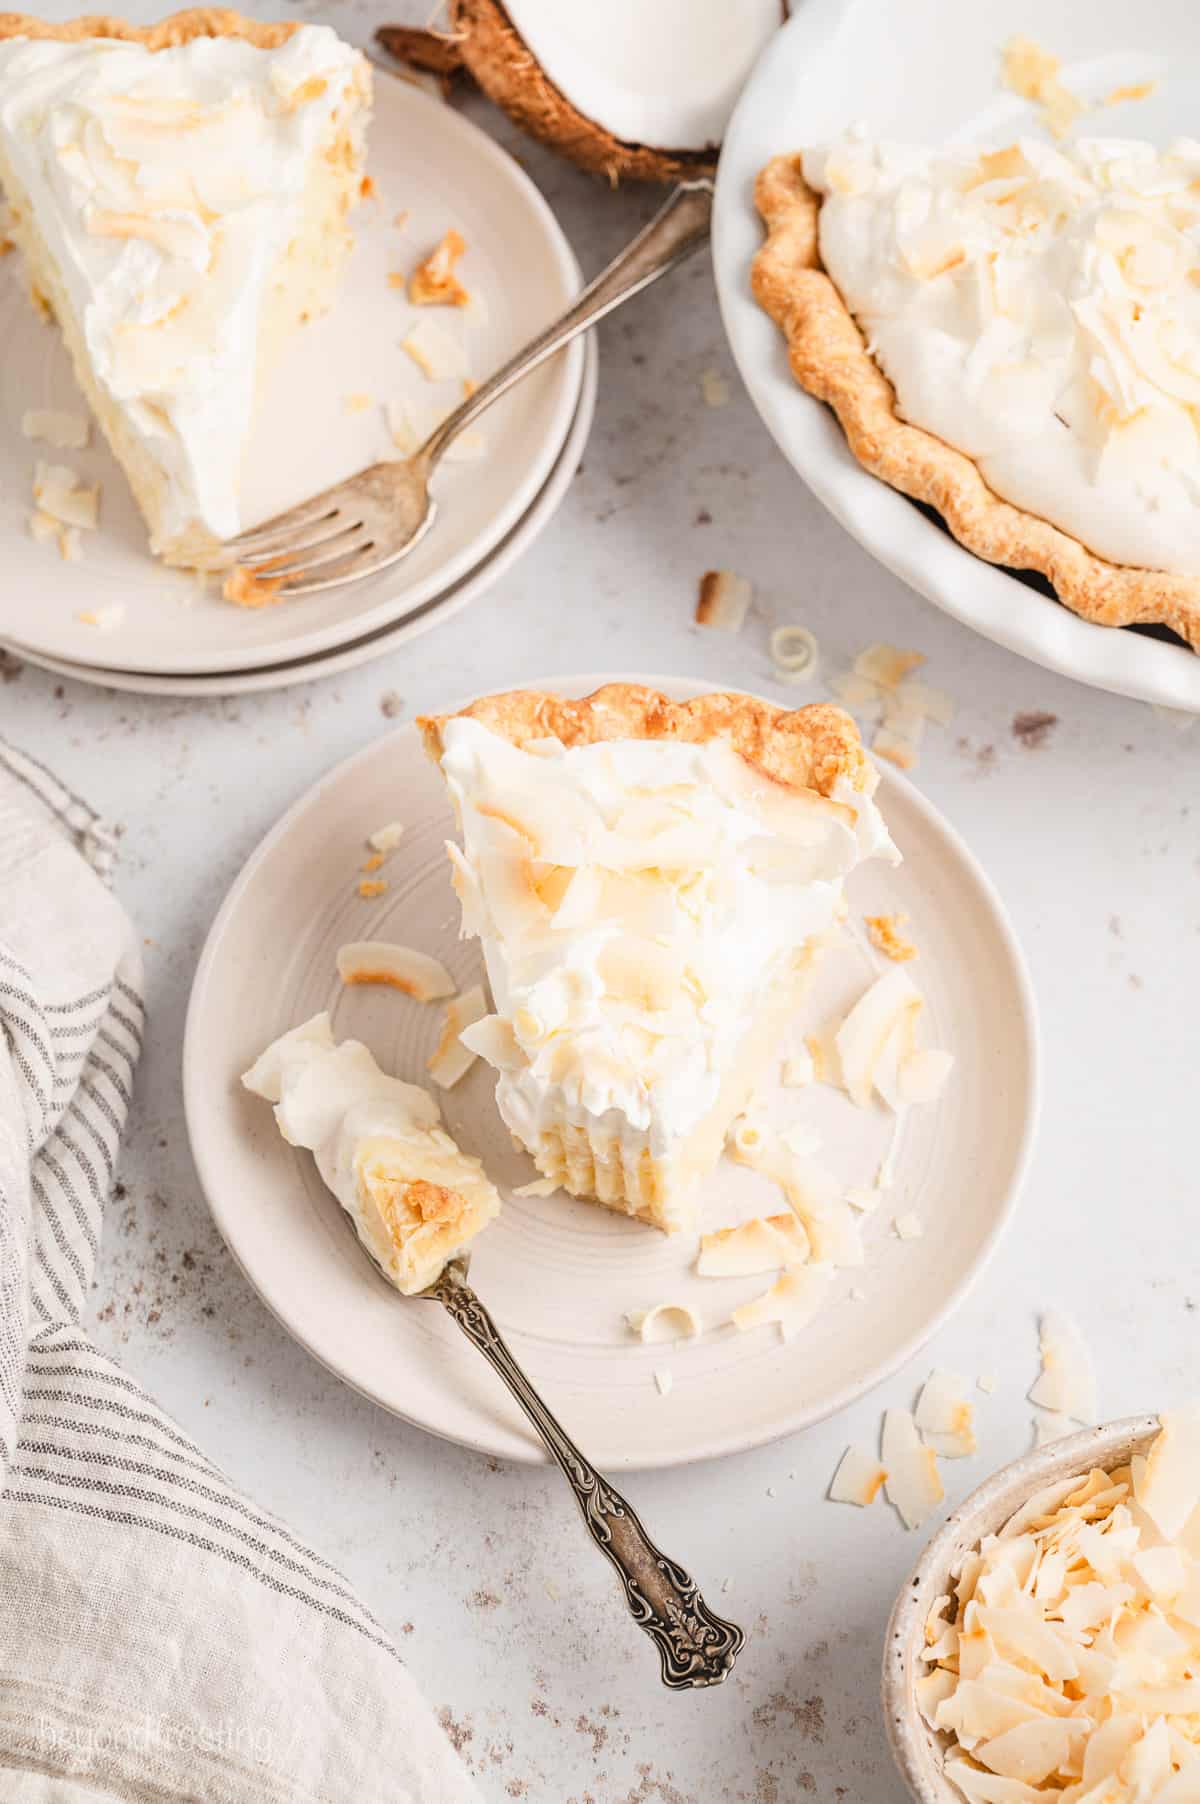 Overhead view of a slice of coconut cream pie on a plate, with a forkful missing from the end, next to a second slice on a plate and the rest of the pie in a pie plate.